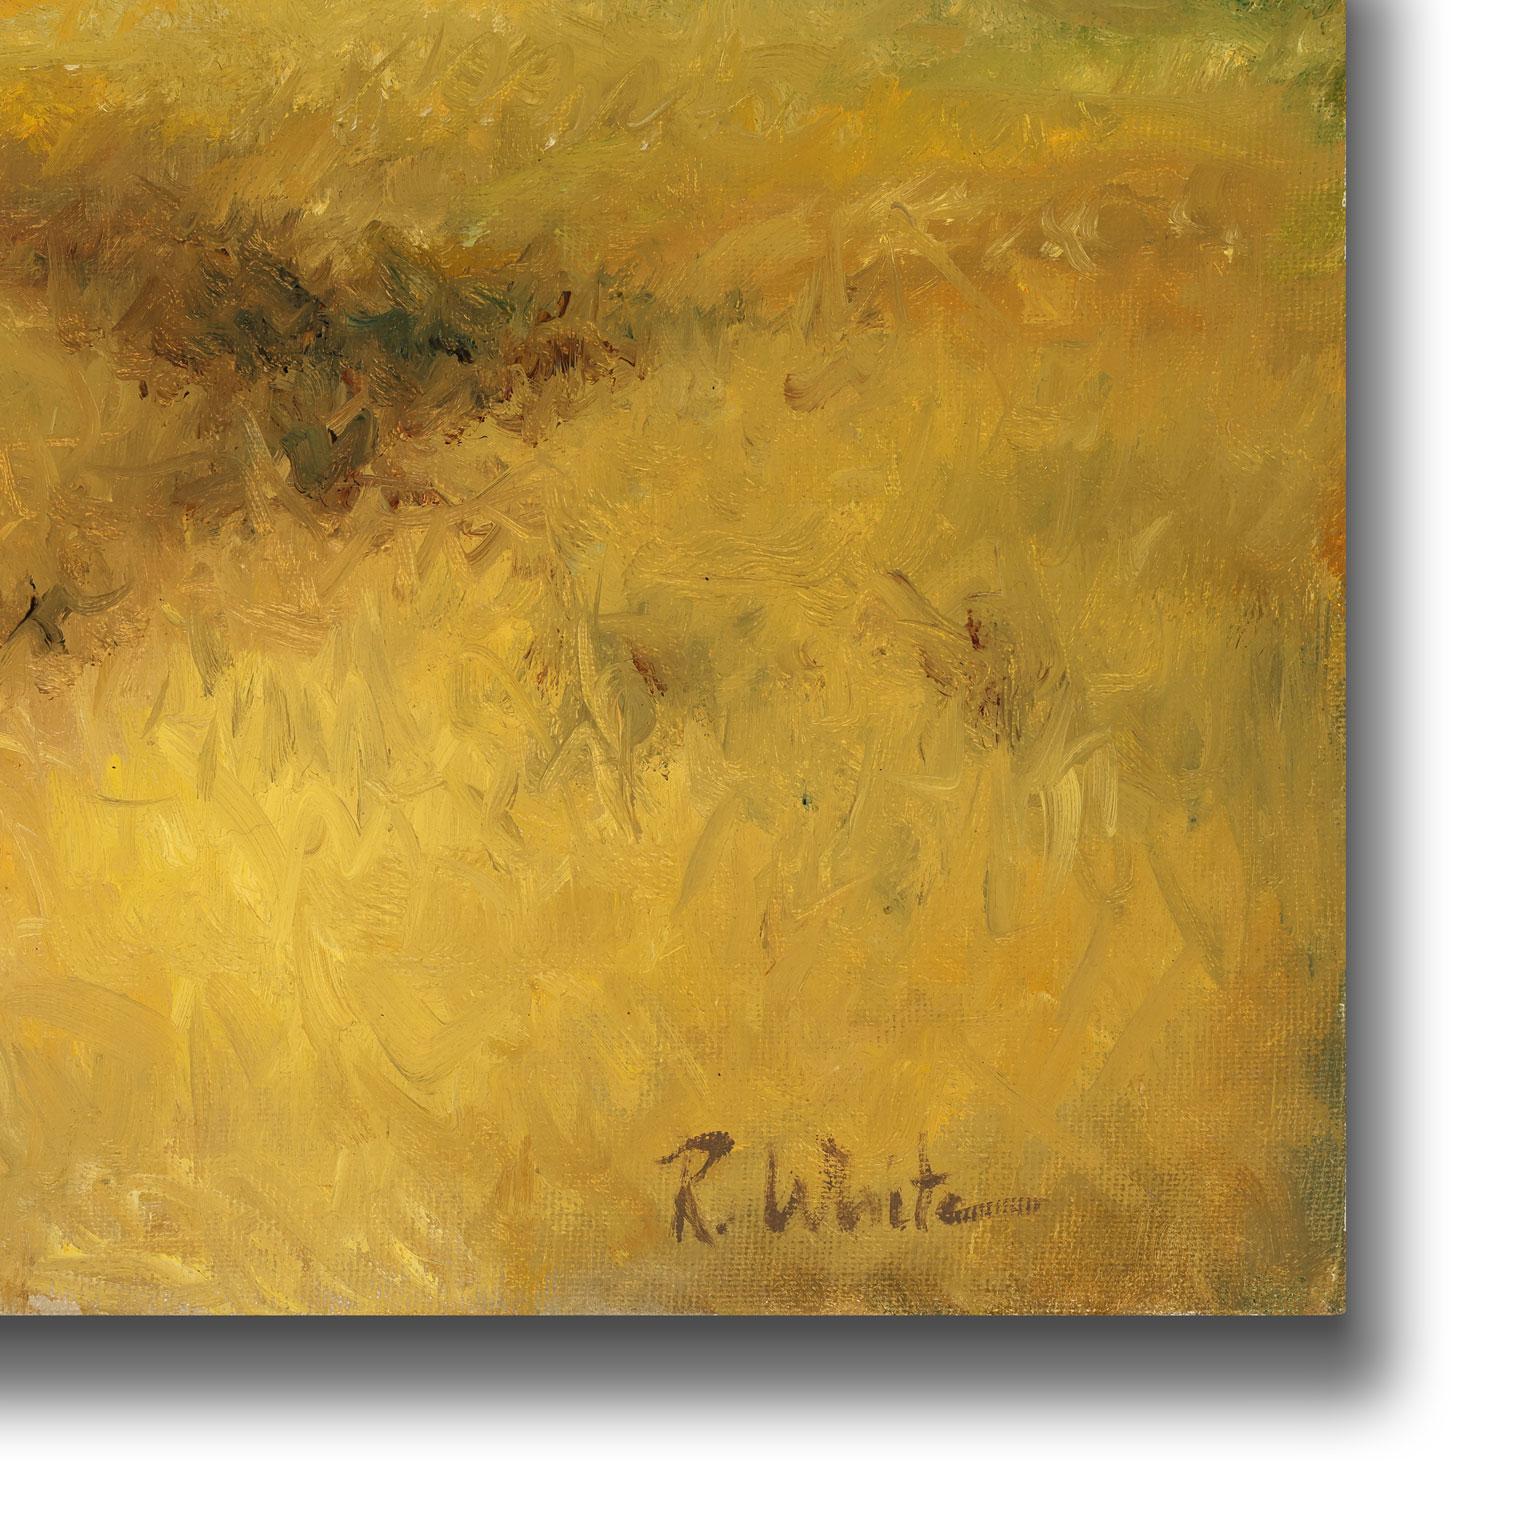 Untitled [Landscape] Original Oil Painting by Robert White, Frameless Display 2